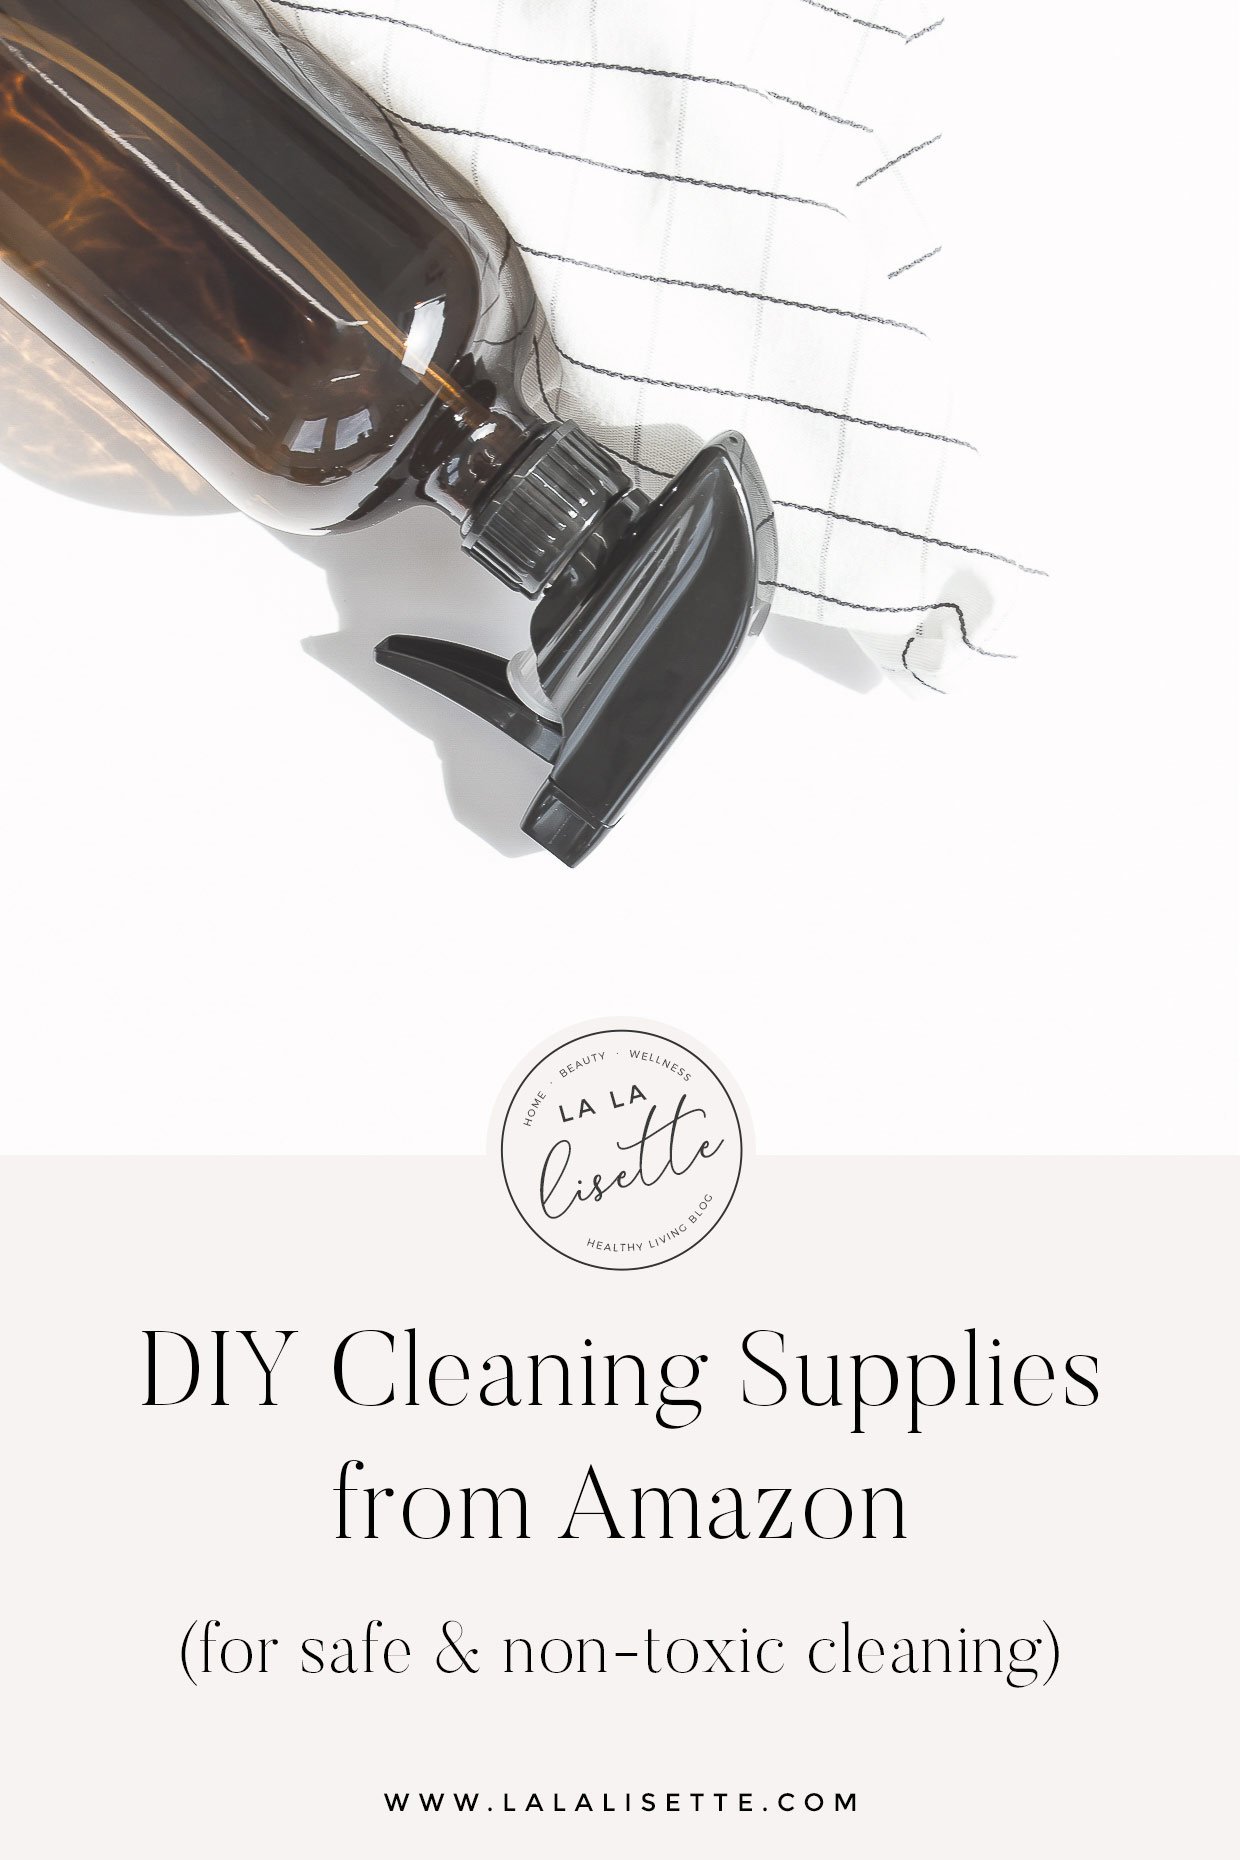 amber glass spray bottle with cotton cloth, text: DIY Cleaning Supplies from Amazon (for safe & non-toxic cleaning) www.lalalisette.com